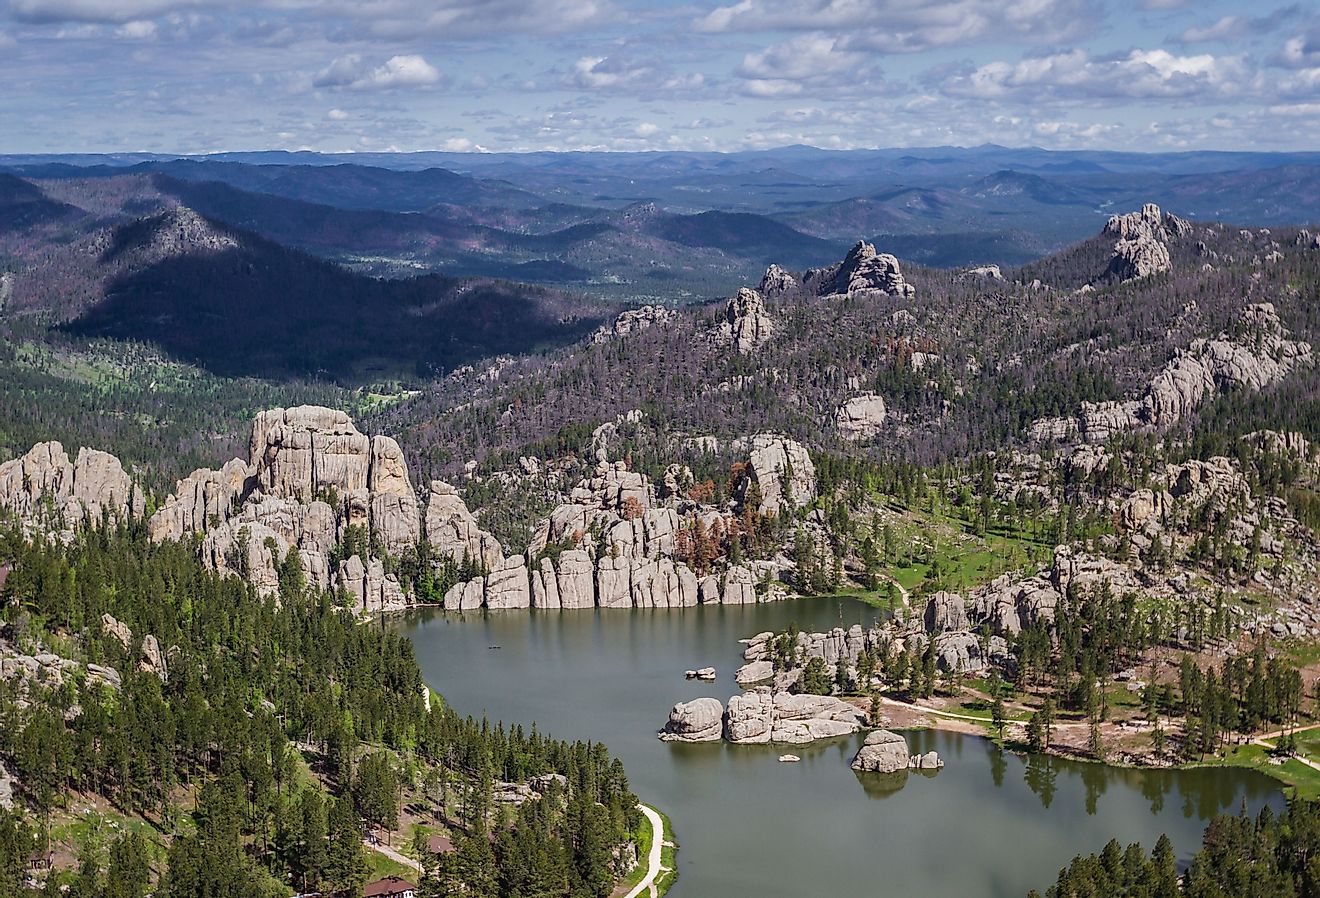 Aerial view of Sylvan Lake and granite formations in the Black Hills. Image credit Wollertz via Shutterstock.